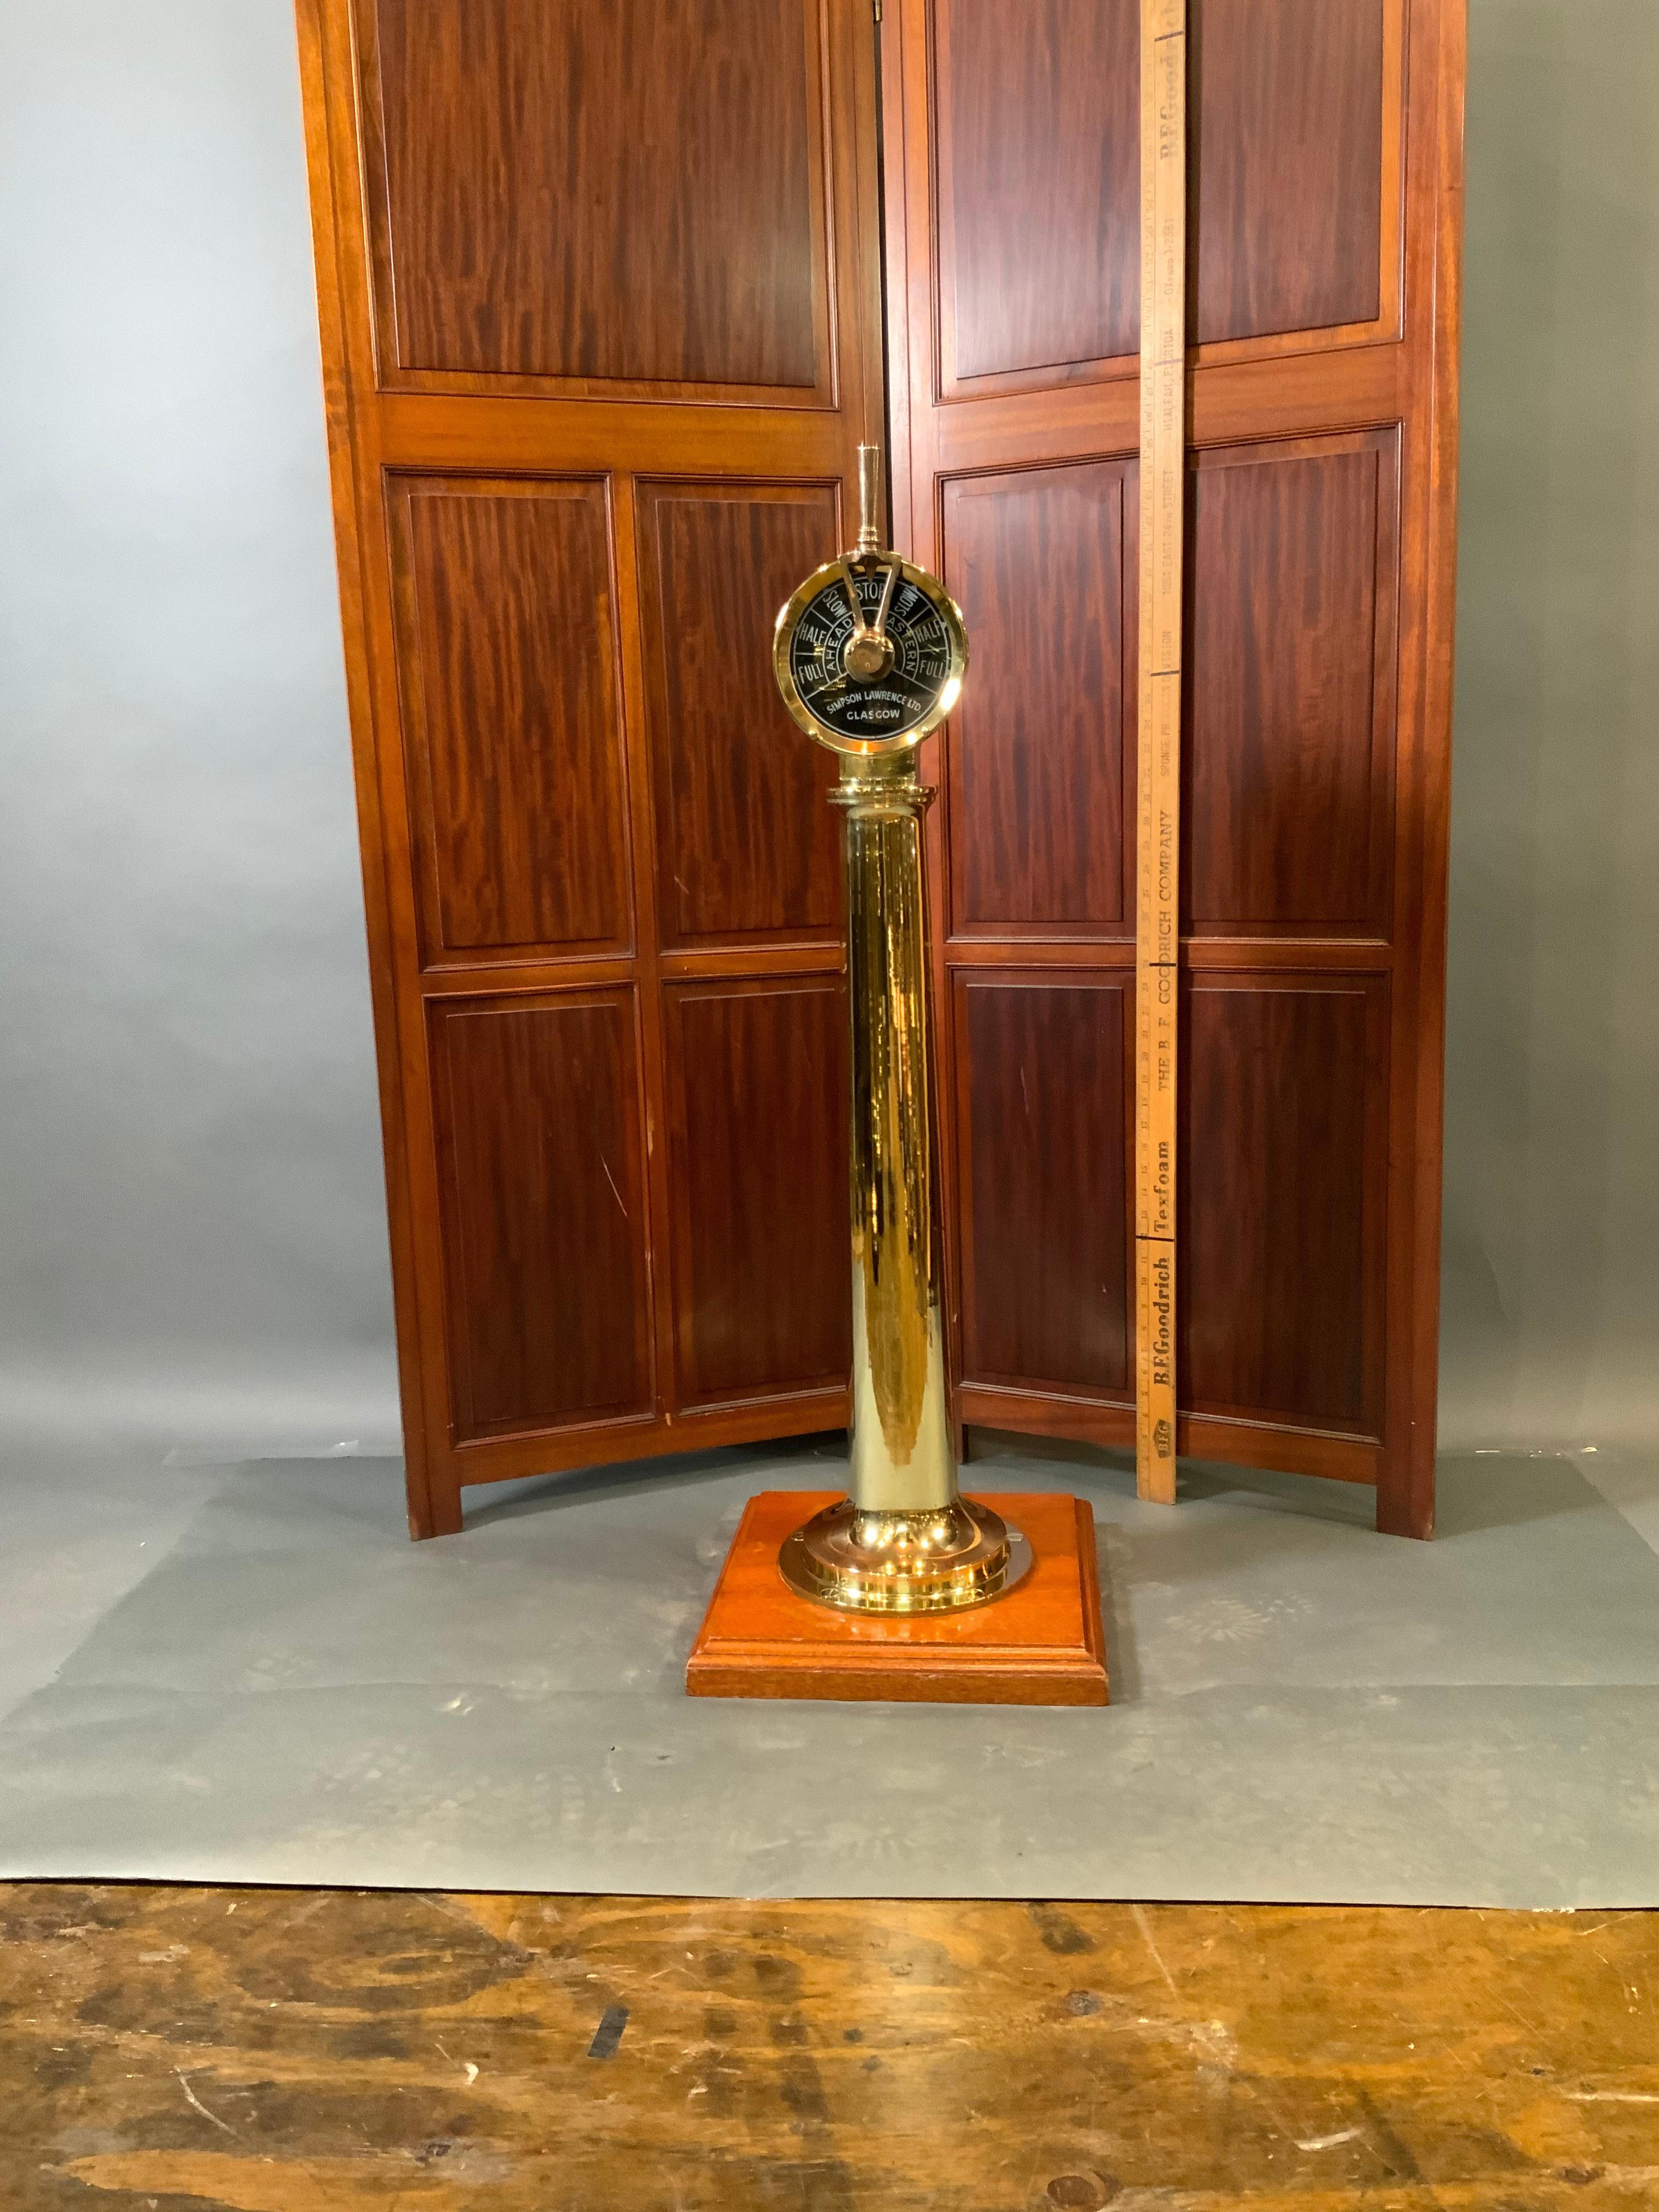 Here is a very sweet solid brass highly polished engine order telegraph by Simpson Lawrence. 43 pounds. Nice slender telegraph mounted to a wood base. Dimensions 40 tall by 7 by 5. Base is 15 by 15 square. $3995.